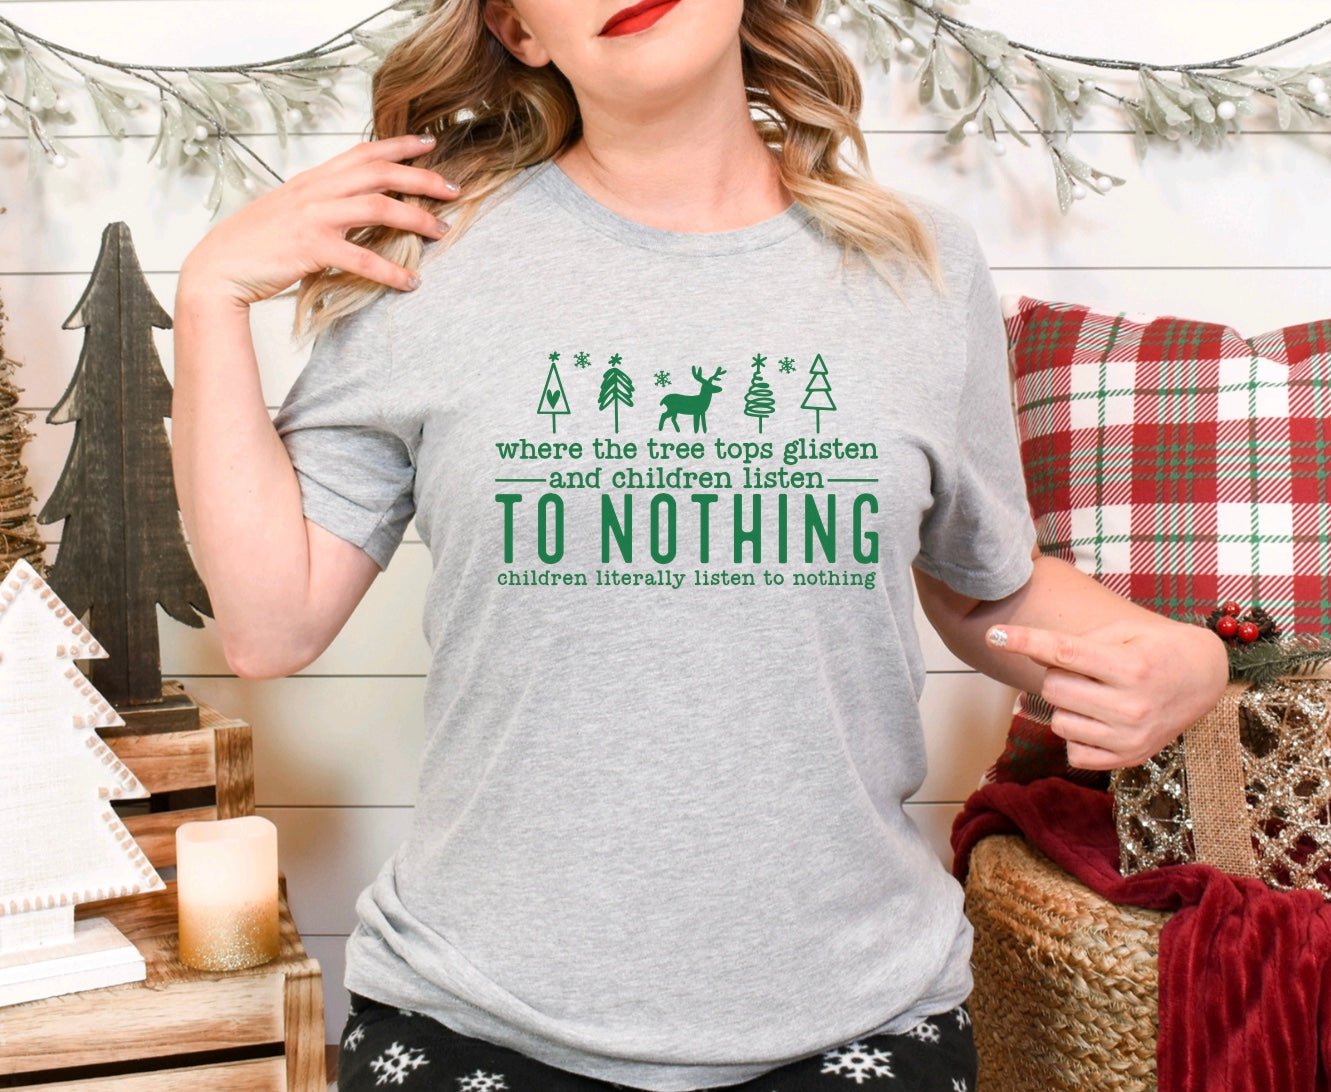 Where the tree tops glisten and children listen to nothing children literally listen to nothing- unisex t-shirt  in grey